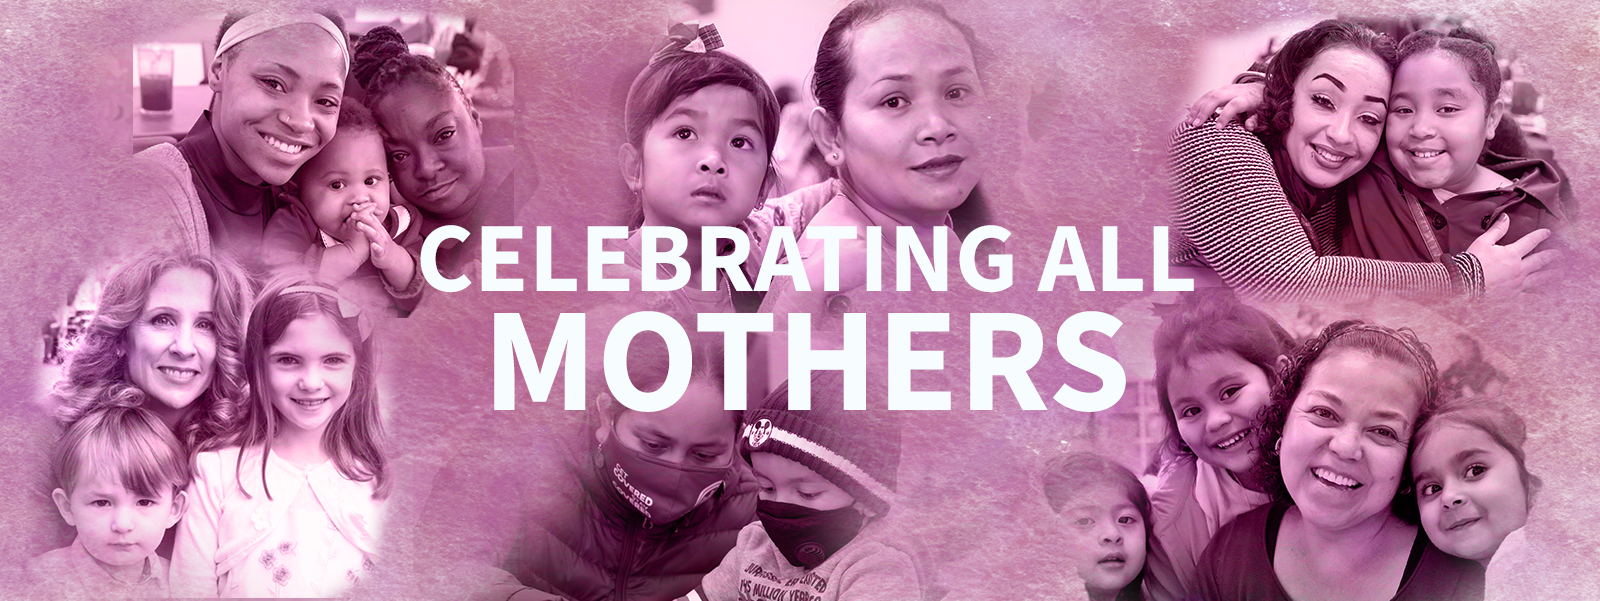 Telling Our Mothers Stories Glide San Francisco Serving The People Of The Tenderloin And 9006